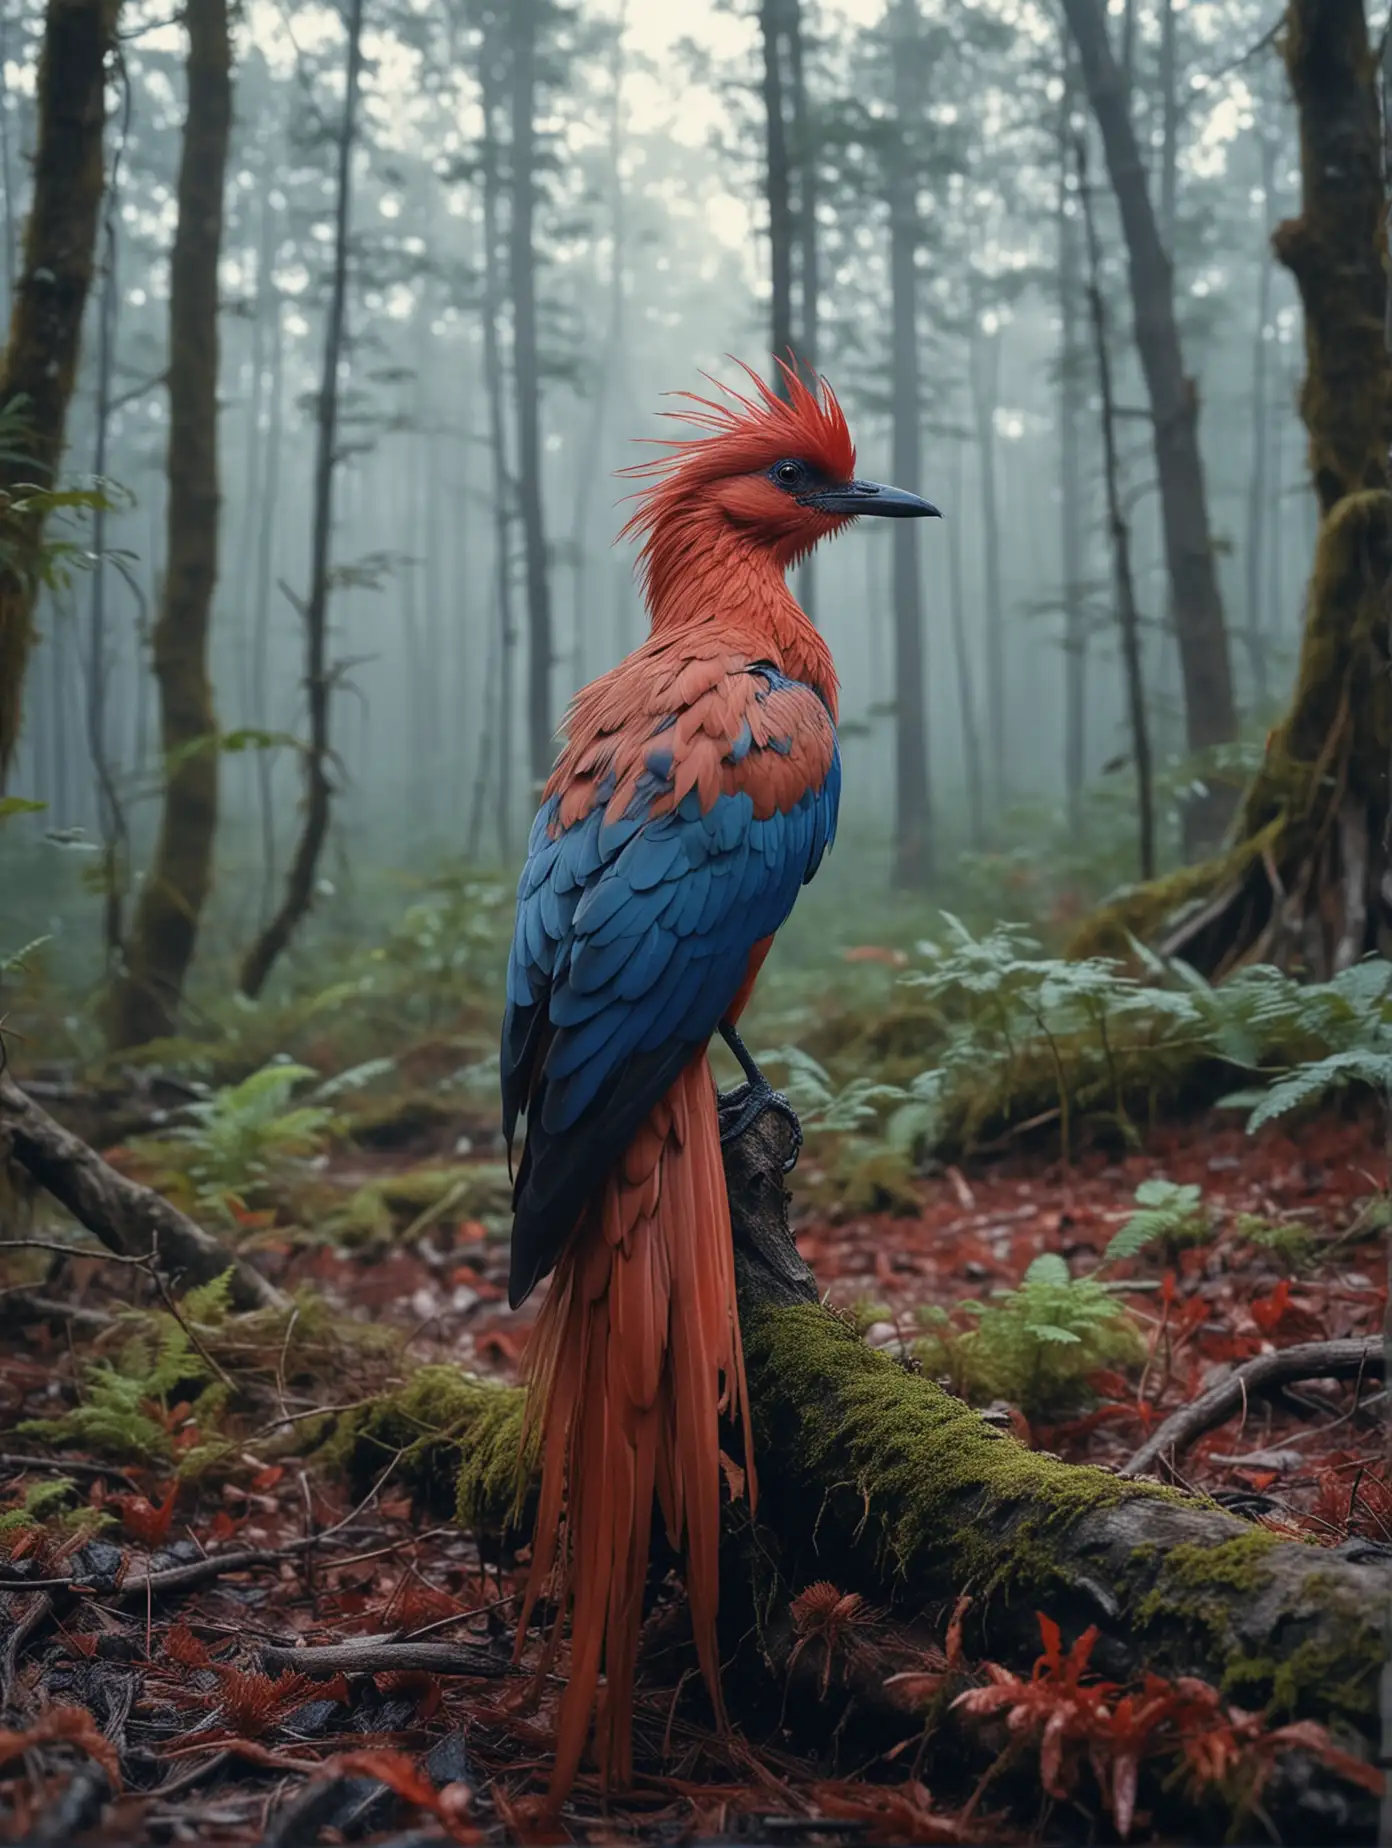 A small, very long, red wavy crested bird. Long Blue wings. Long Red Tail. relaxing in the forest. wide angle shot. realistic, film stock, bright colors" twilight. fog.